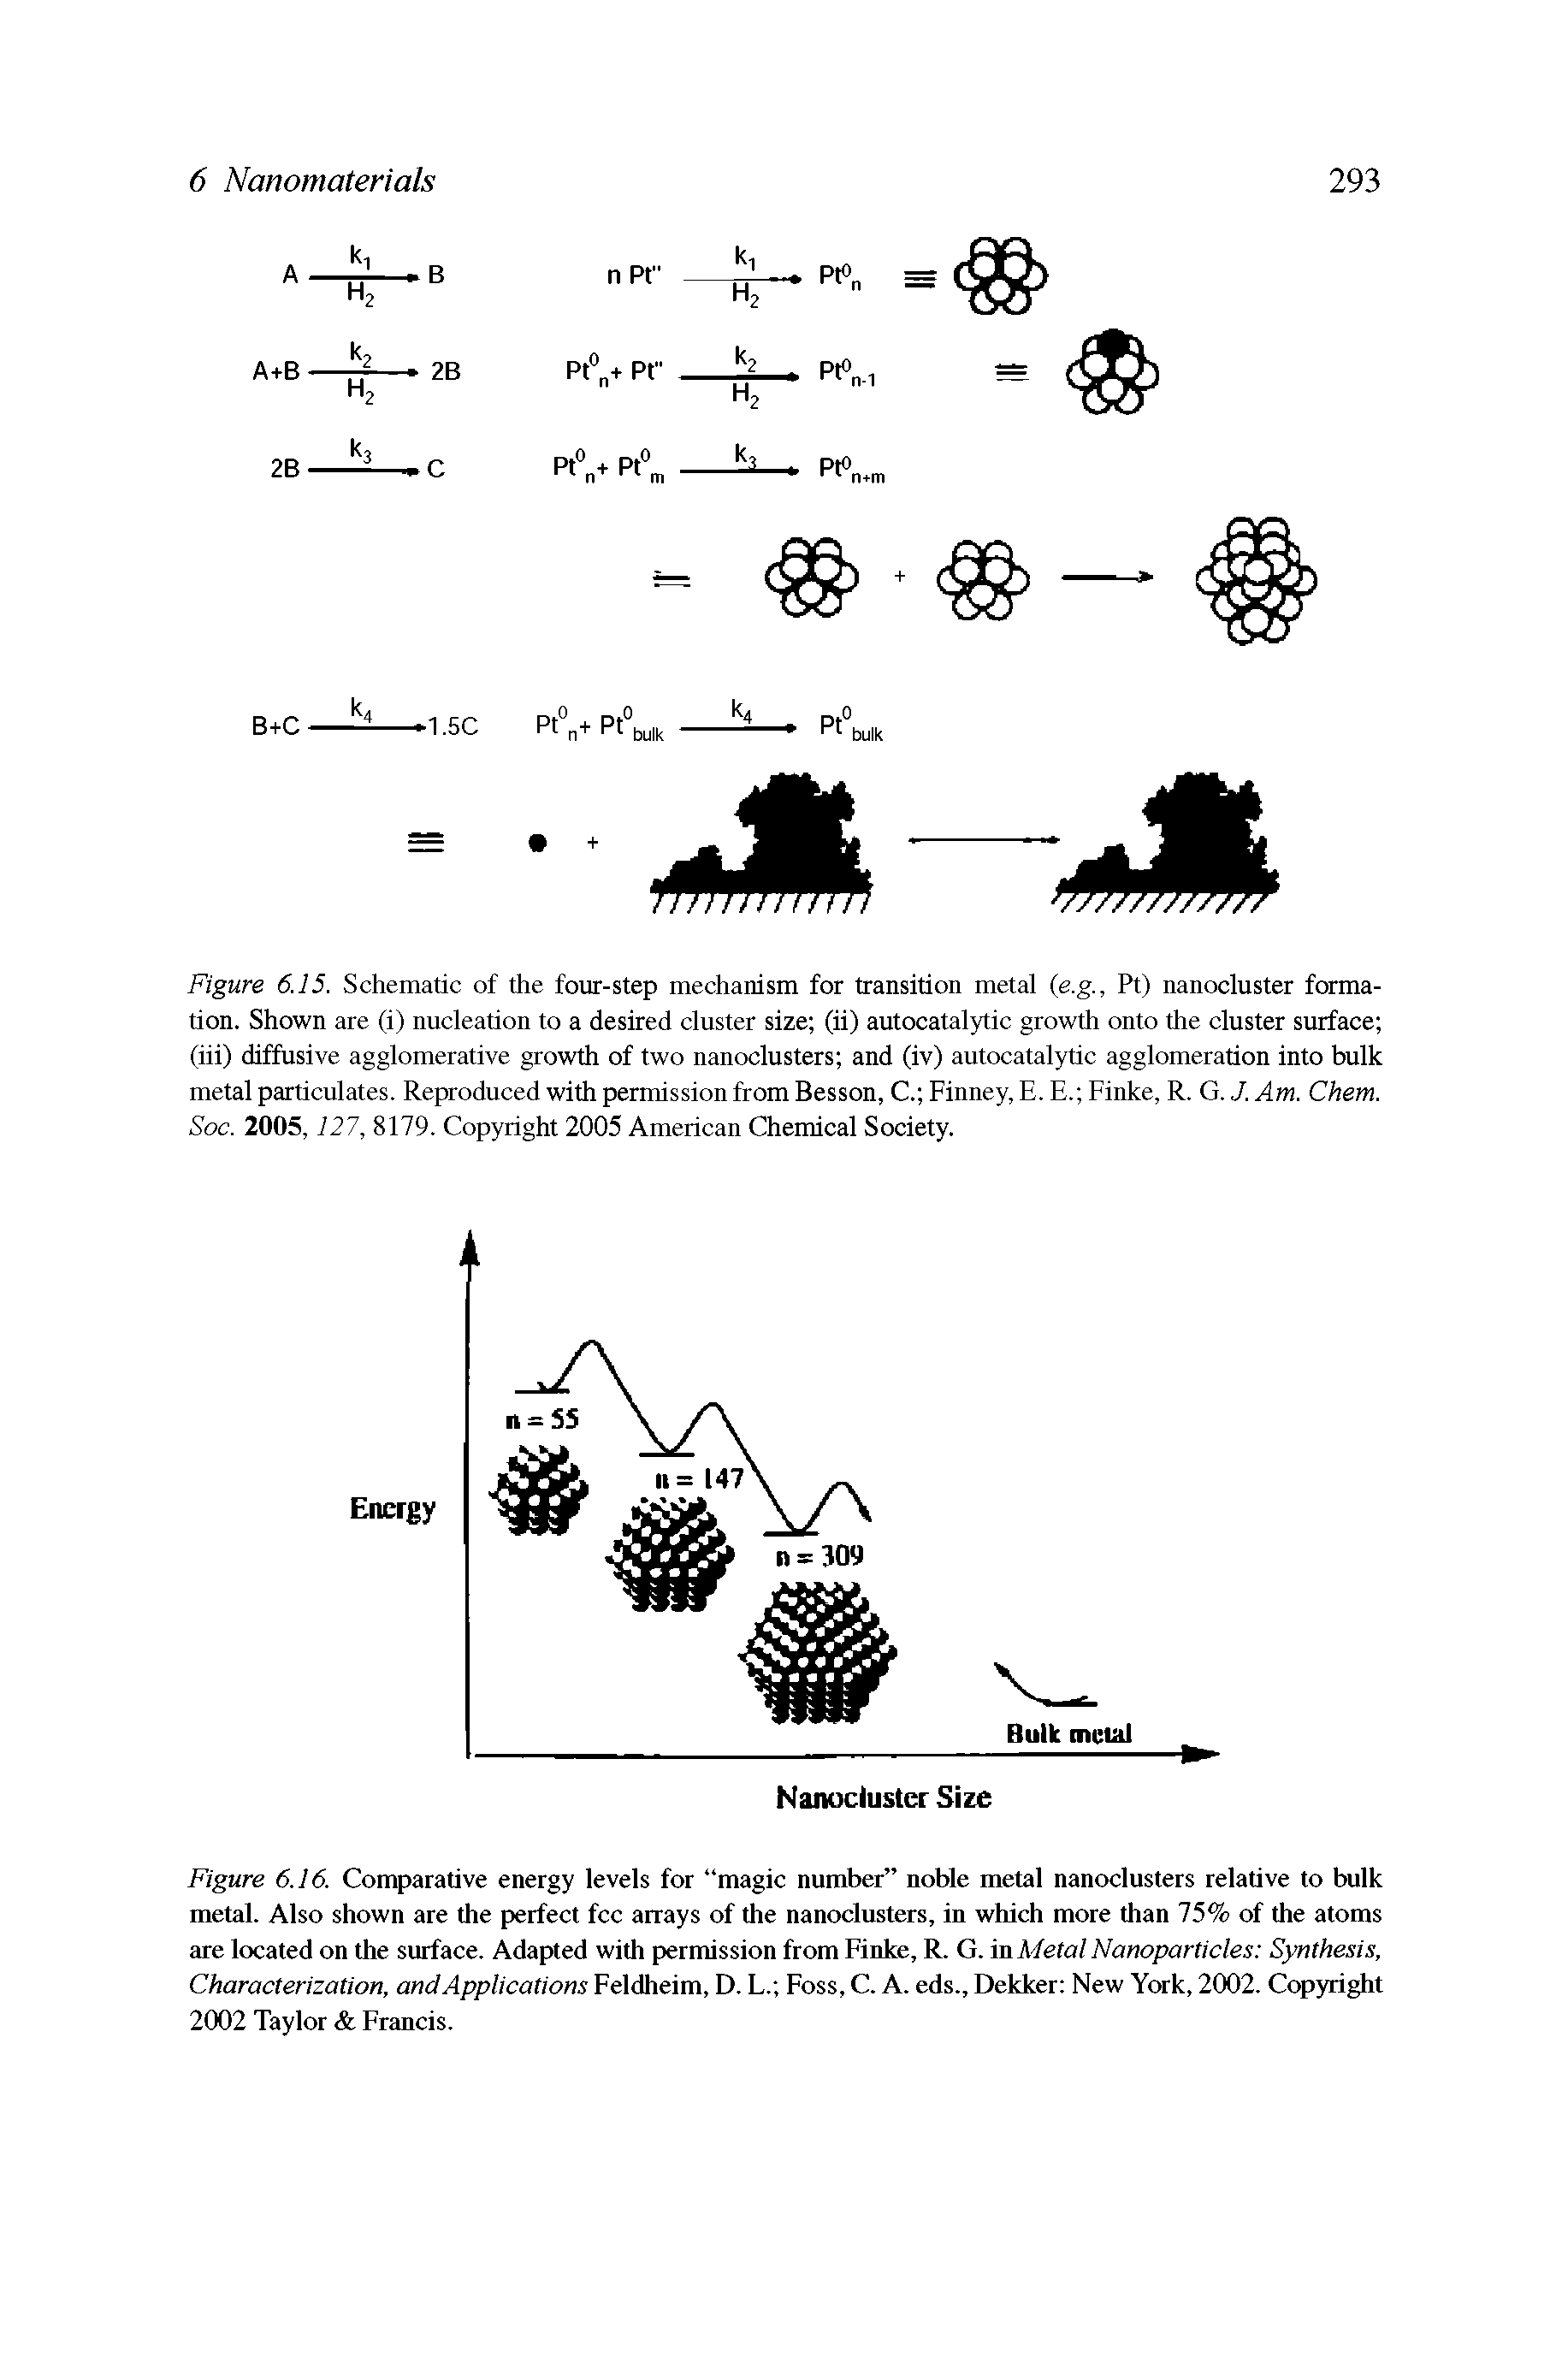 Figure 6.16. Comparative energy levels for magic number noble metal nanoclusters relative to bulk metal. Also shown are the perfect fee arrays of the nanoclusters, in which more than 75% of the atoms are located on the surface. Adapted with permission from Finke, R. G. in Metal Nanoparticles Synthesis, Characterization, and Applications Feldheim, D. L. Foss, C. A. eds., Dekker New York, 2002. Copyright 2002 Taylor Francis.